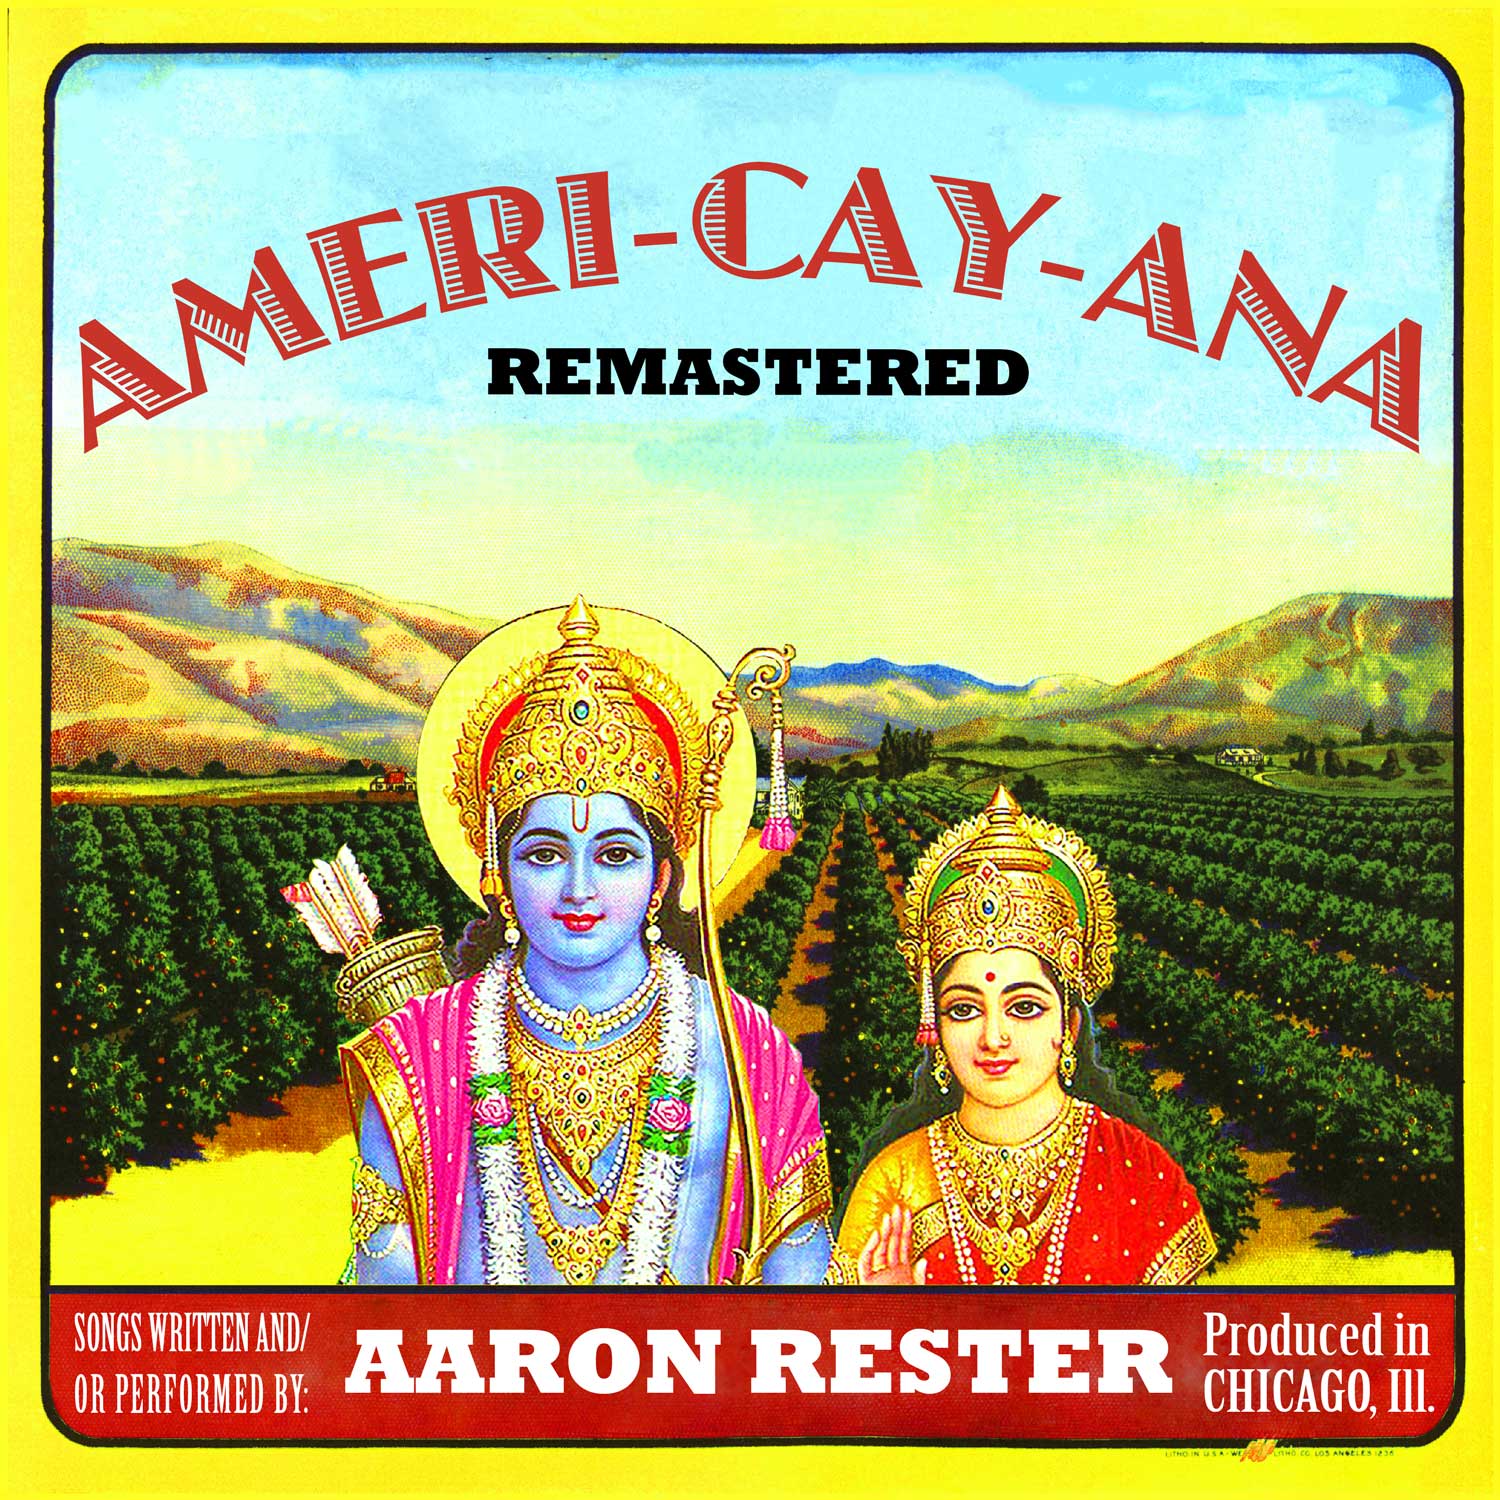 Americayana (Remastered) by Aaron Rester